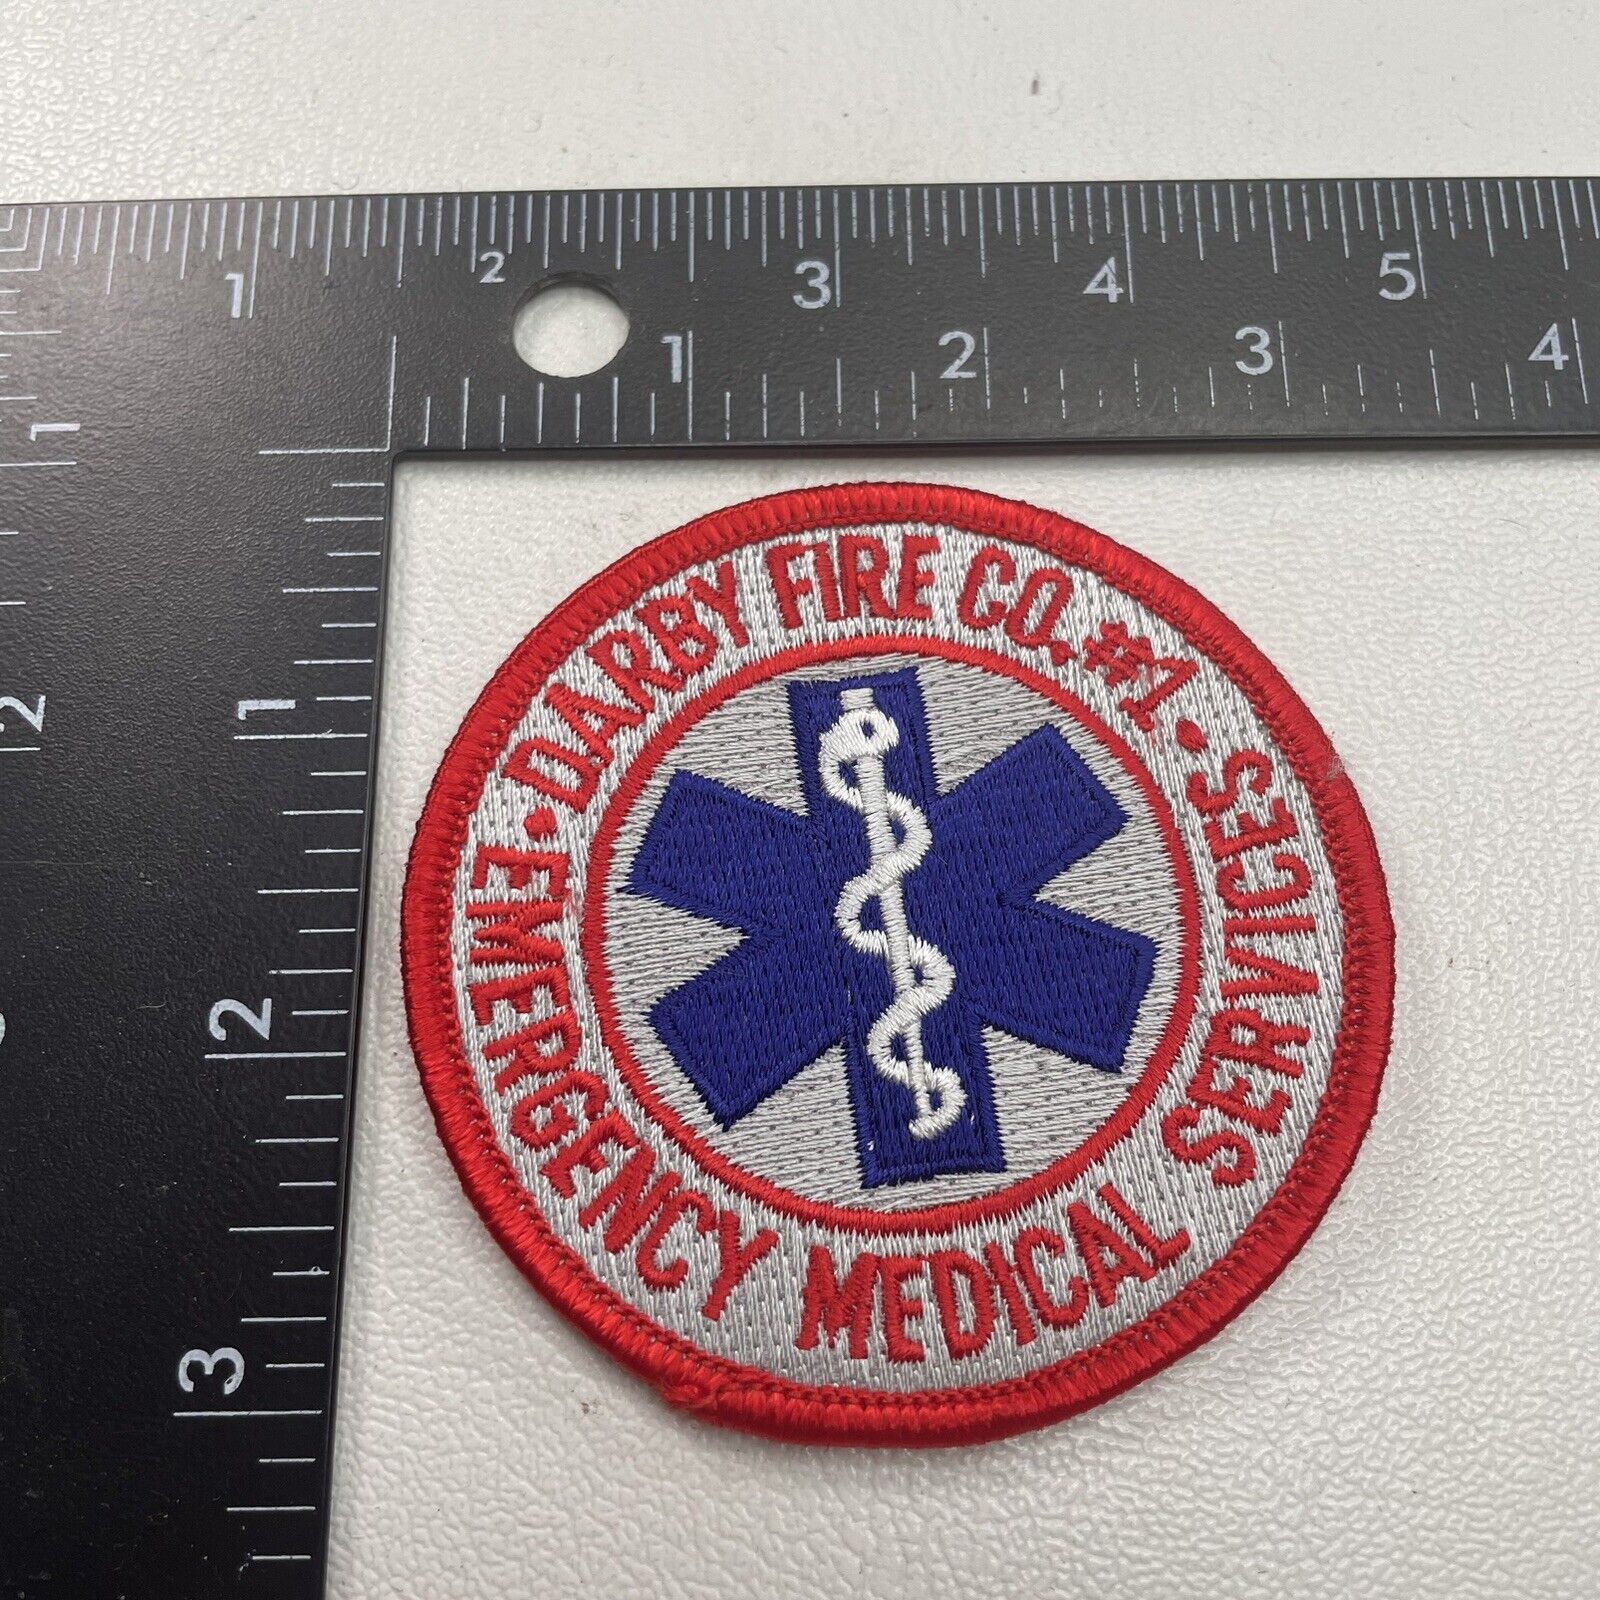 DARBY FIRE CO. #1 Emergency Medical Services Patch 31WD